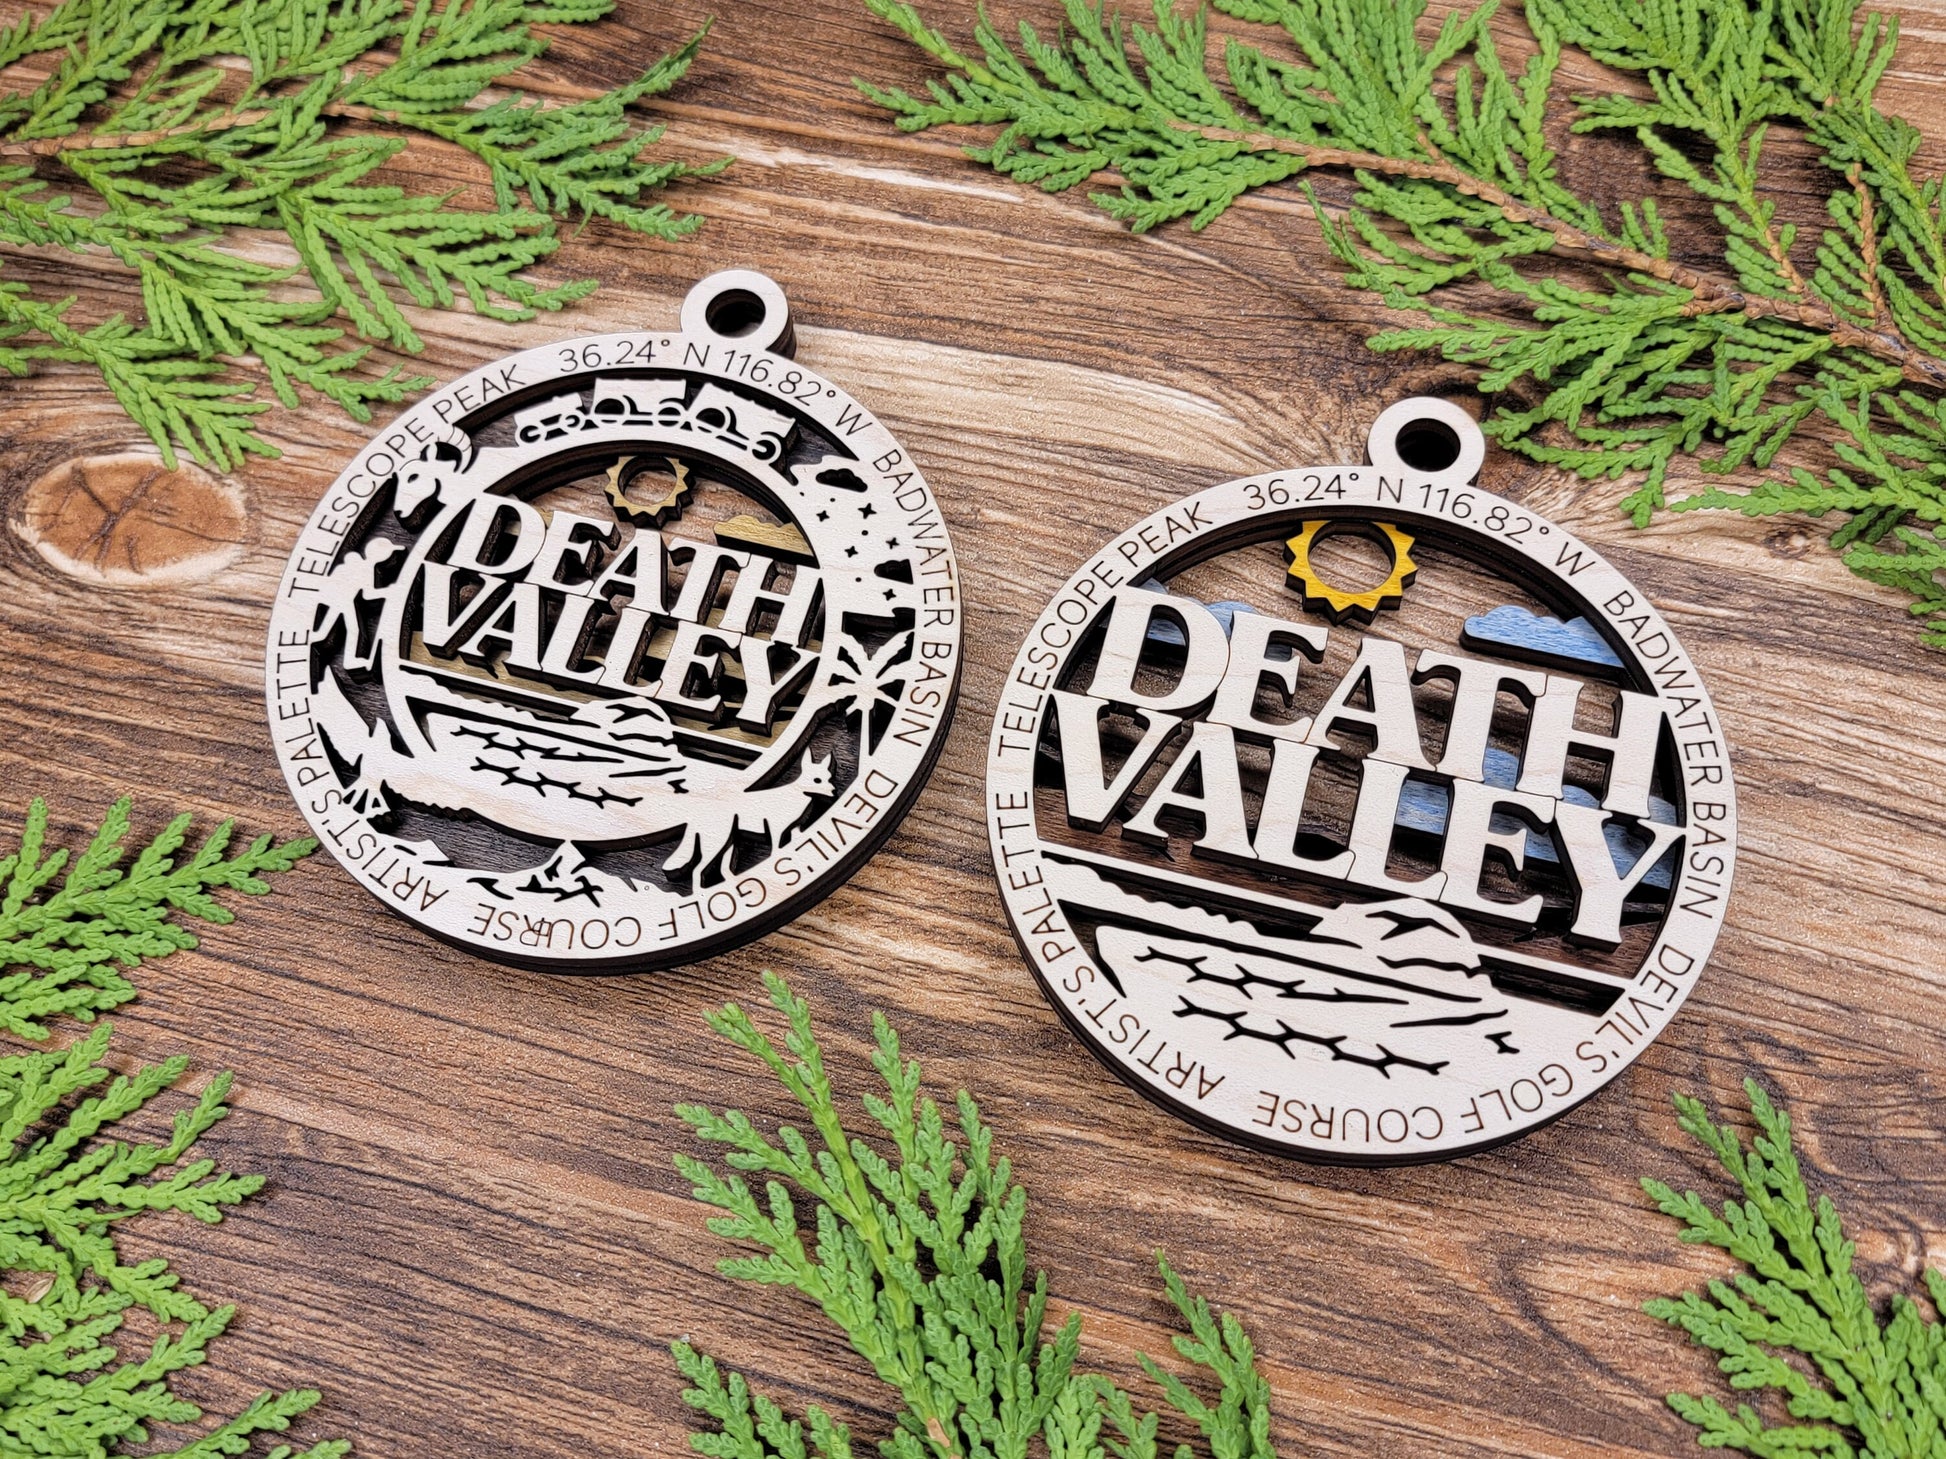 Death Valley Park Ornament - Includes 2 Ornaments - Laser Design SVG, PDF, AI File Download - Tested On Glowforge and LightBurn